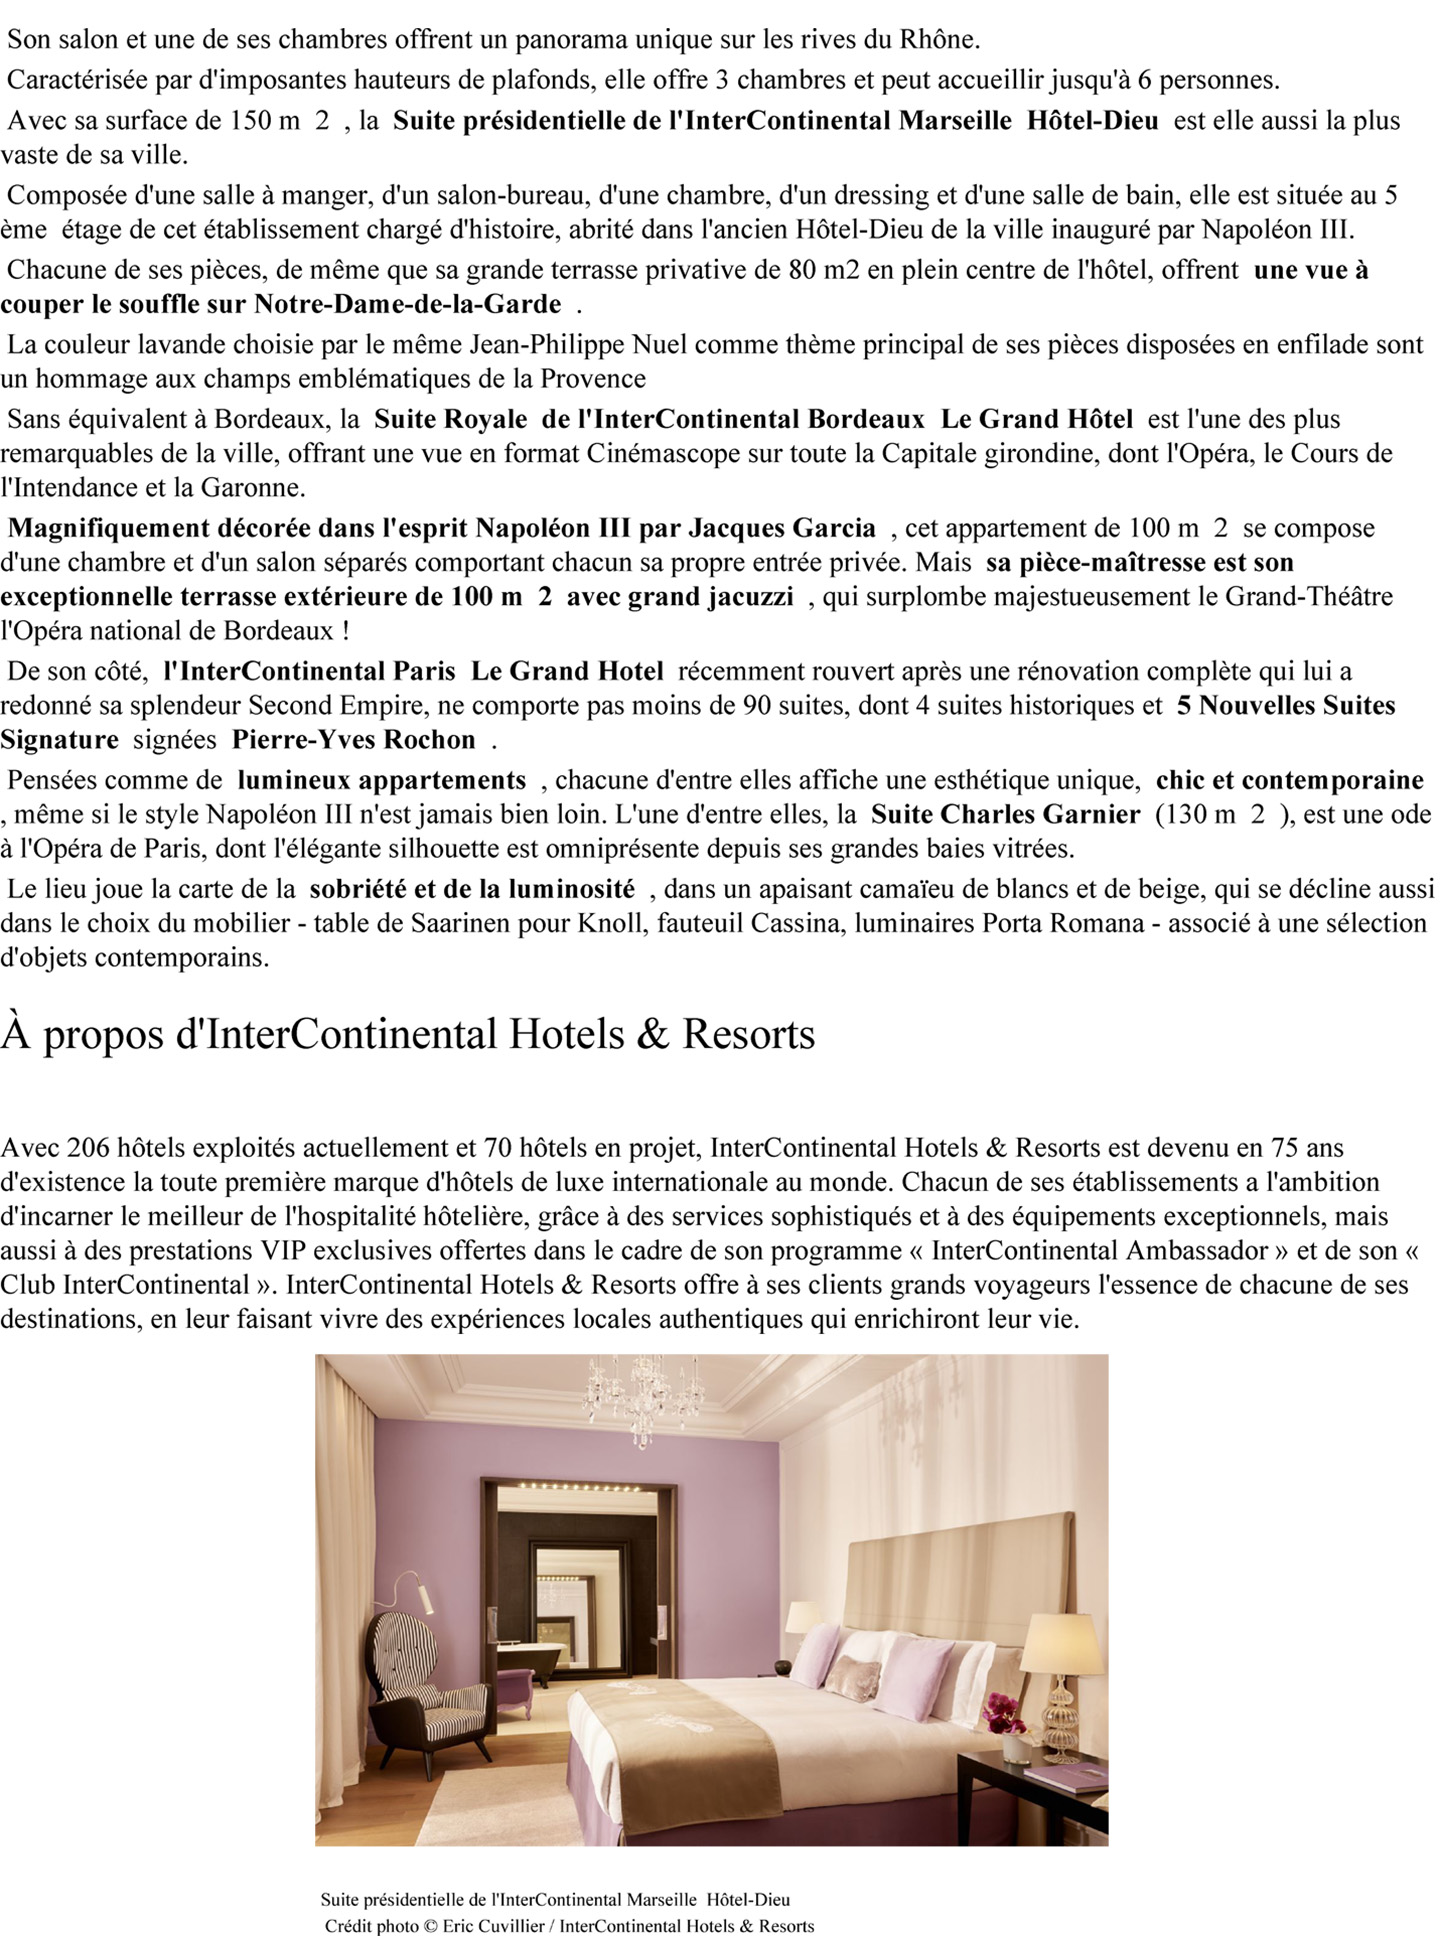 article on the collaboration between the studio jean-phiippe nuel and InterContinental for the renovation of several god hotels and their transformation into 5 star luxury hotels